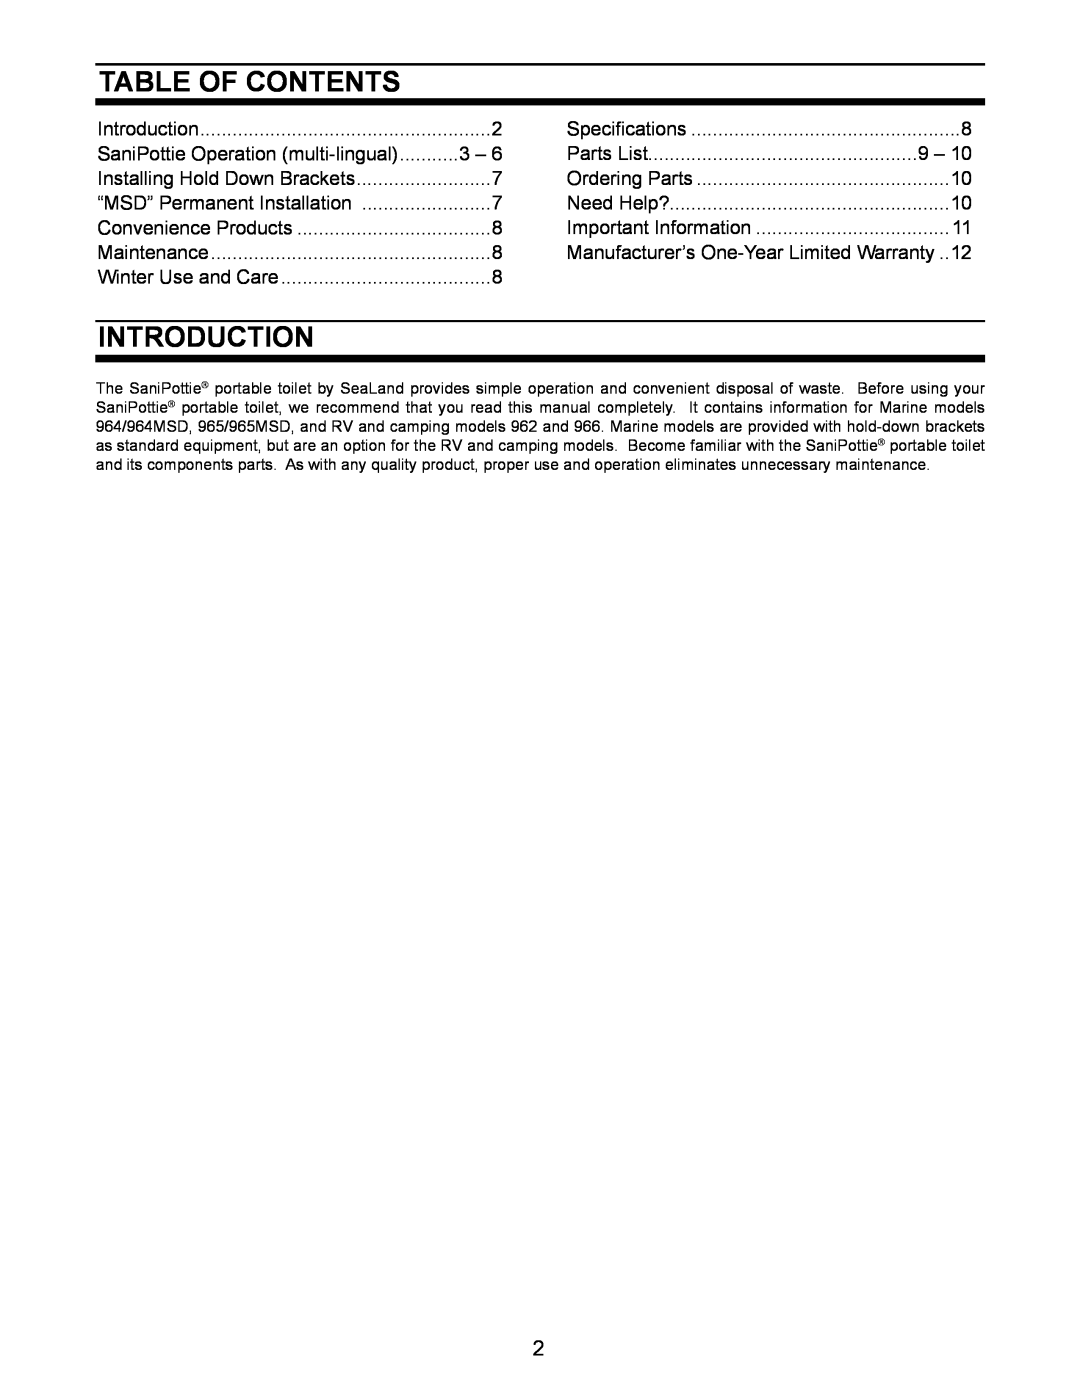 Dometic 966, 962 owner manual Table of Contents, introduction 